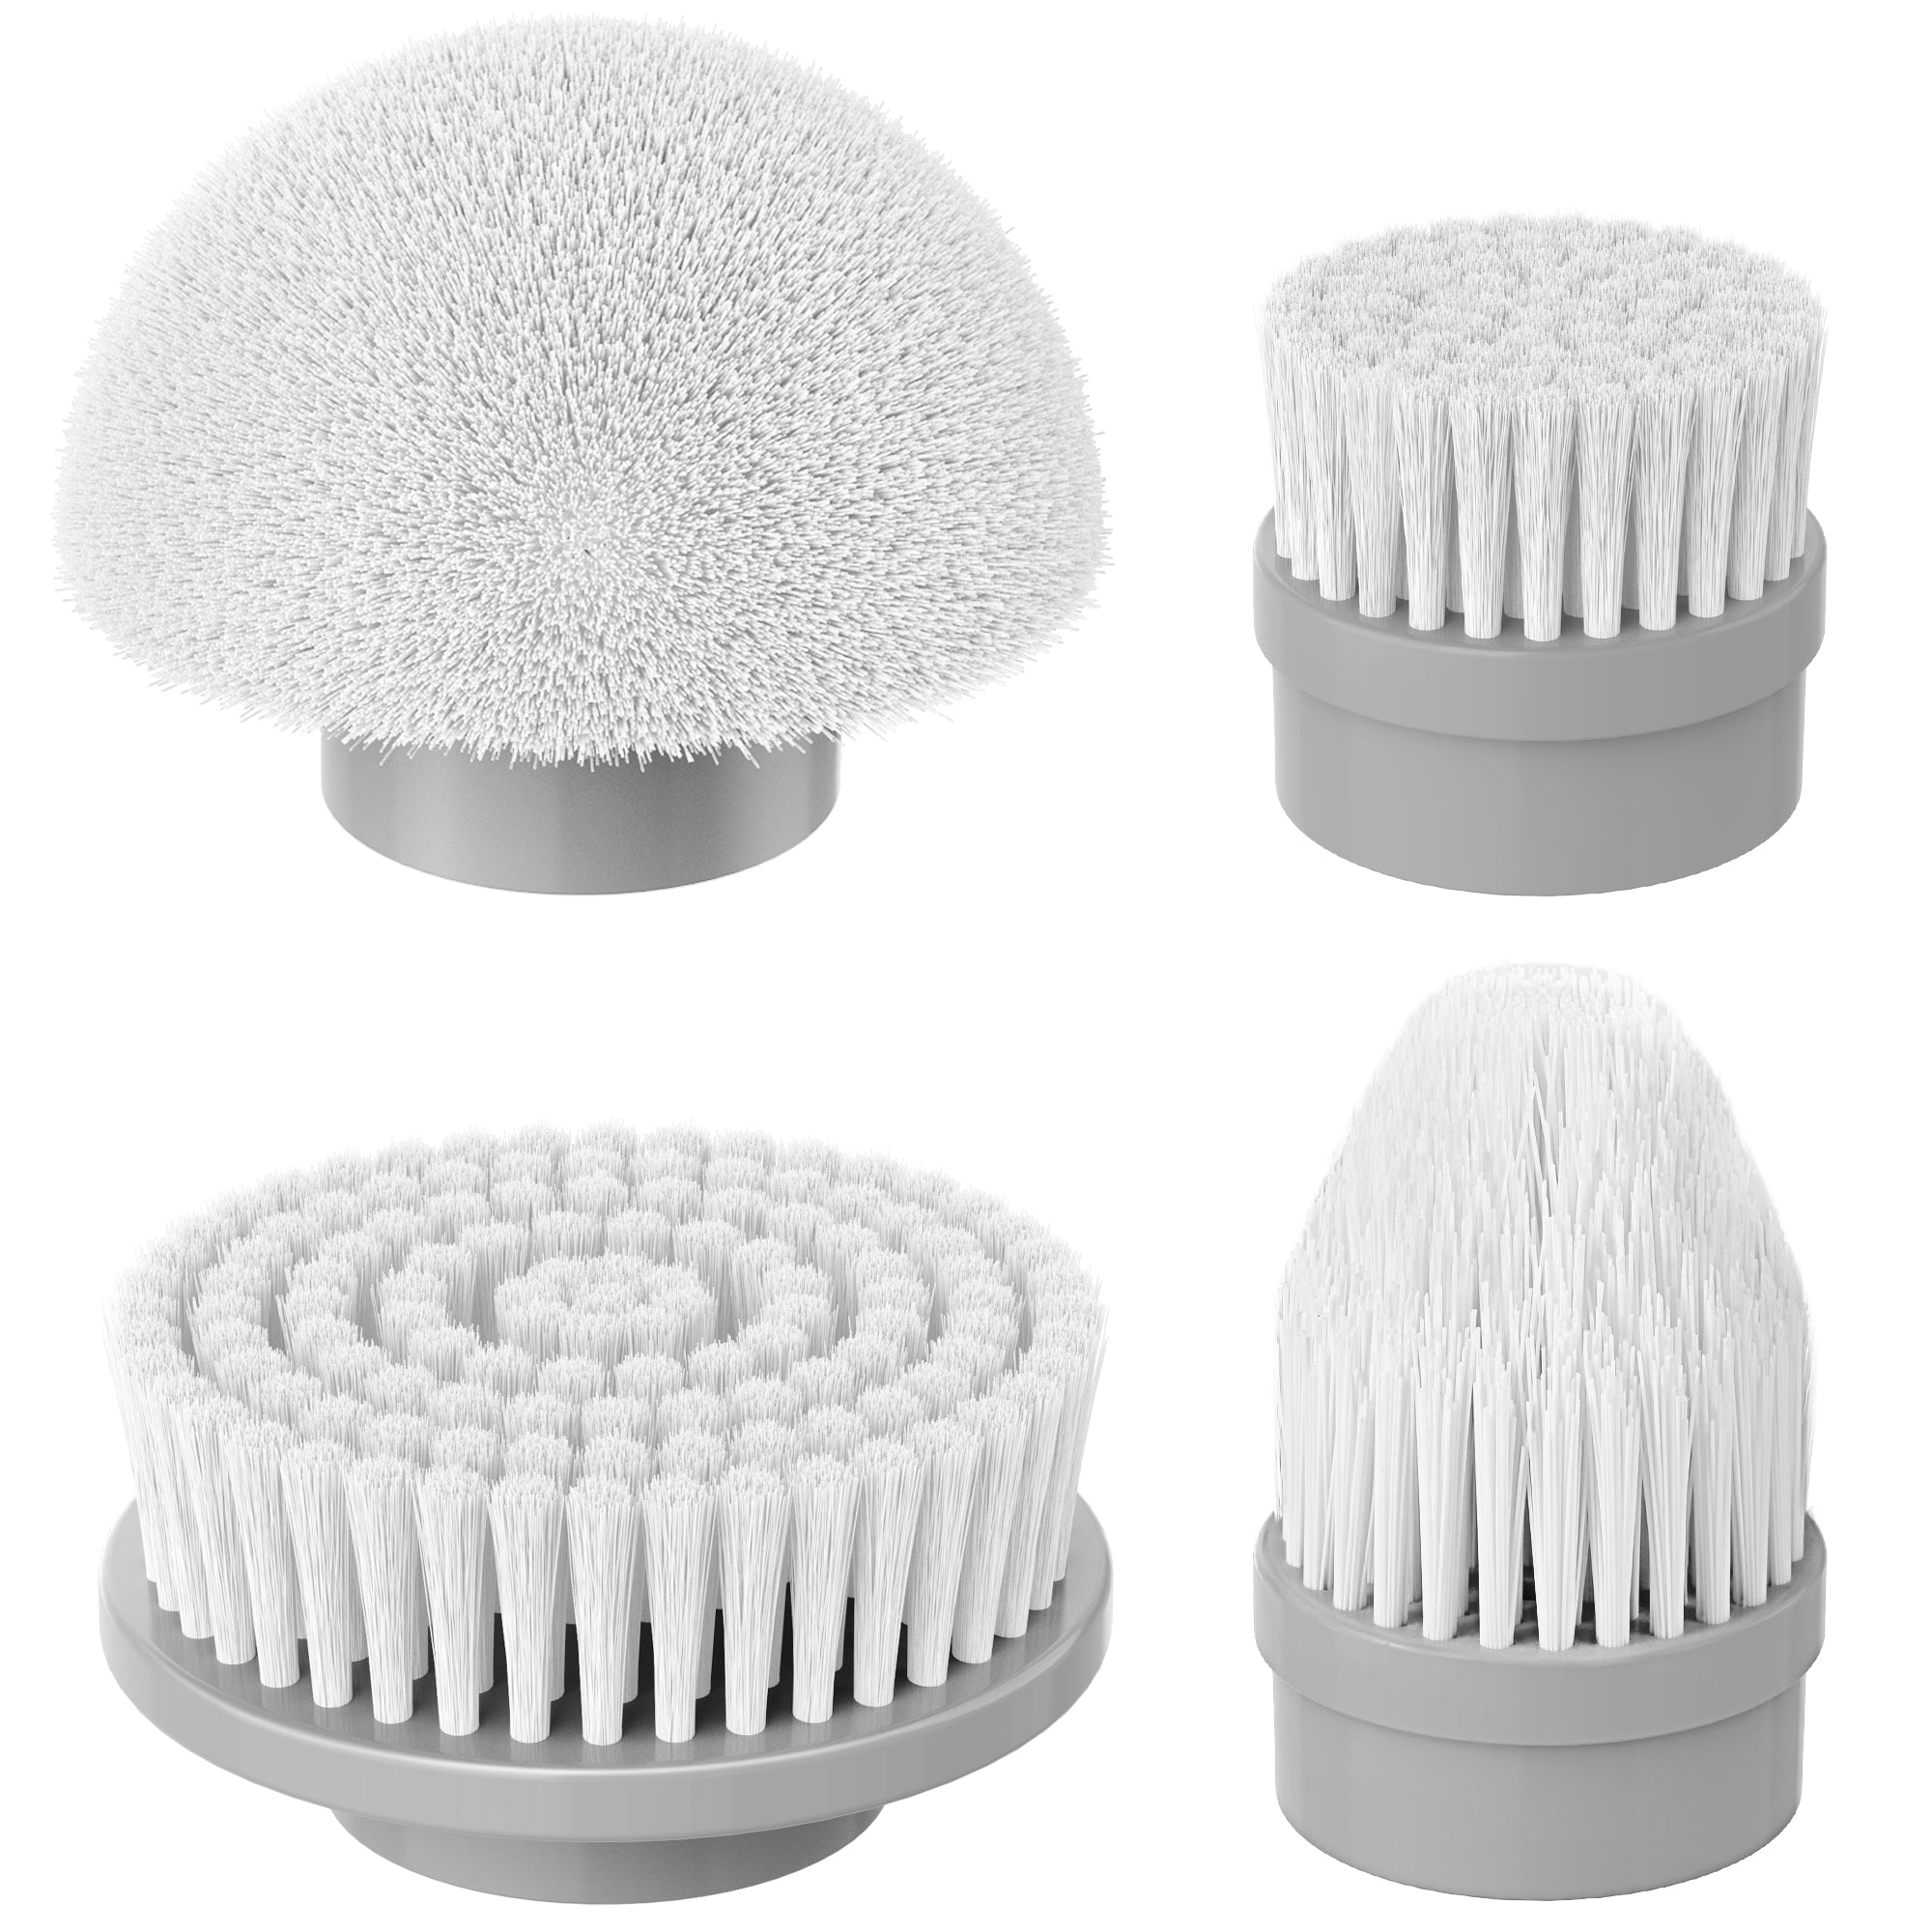 Electric Spin Cleaner Electric Spin Scrubber with 6 Replacement